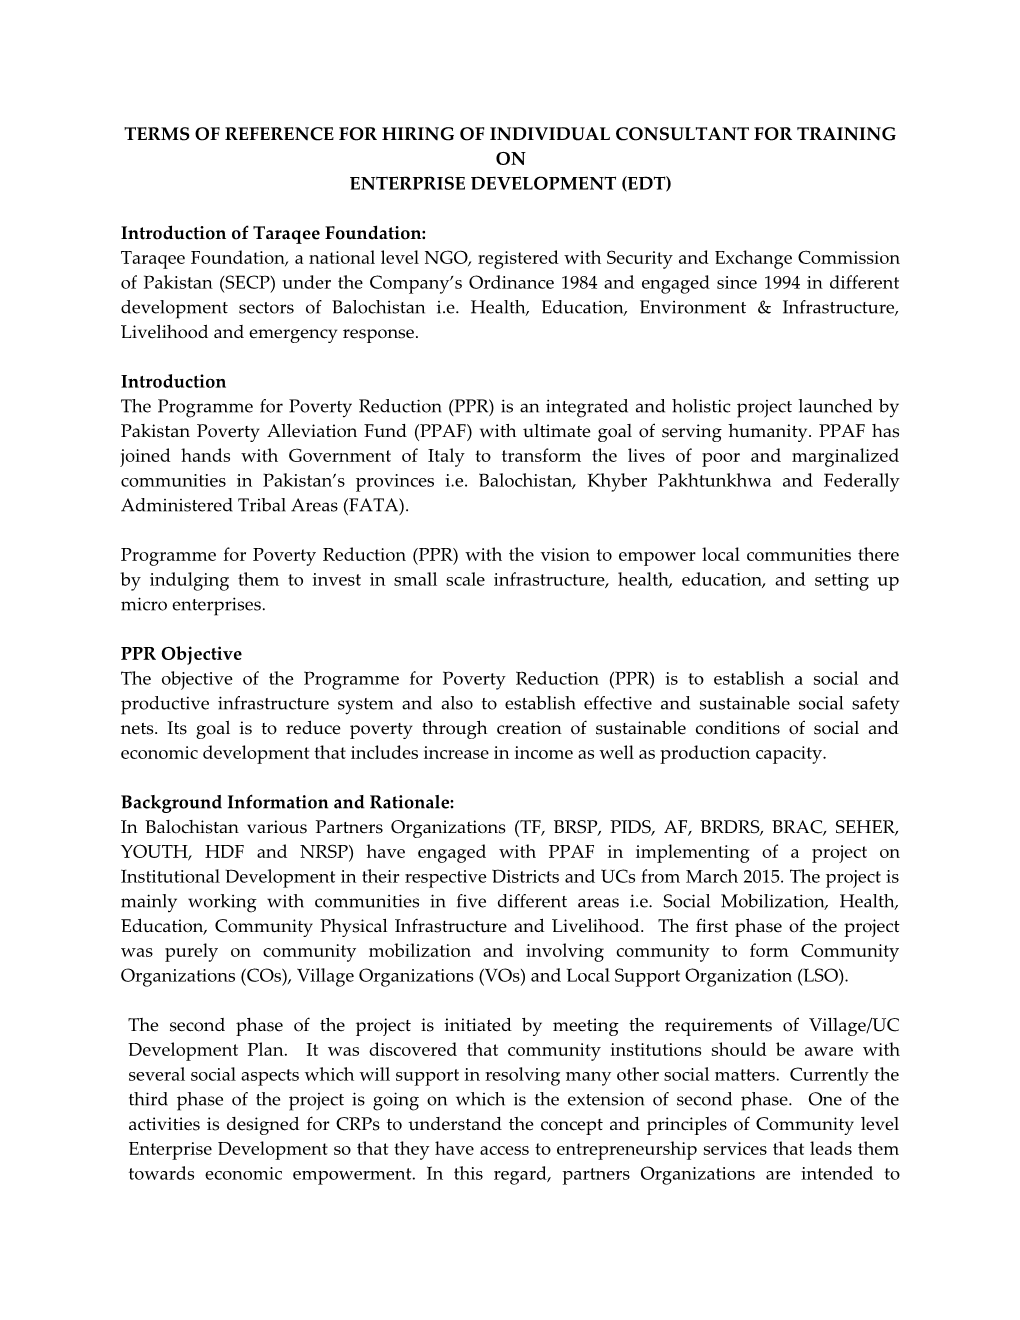 Terms of Reference for Hiring of Individual Consultant for Training on Enterprise Development